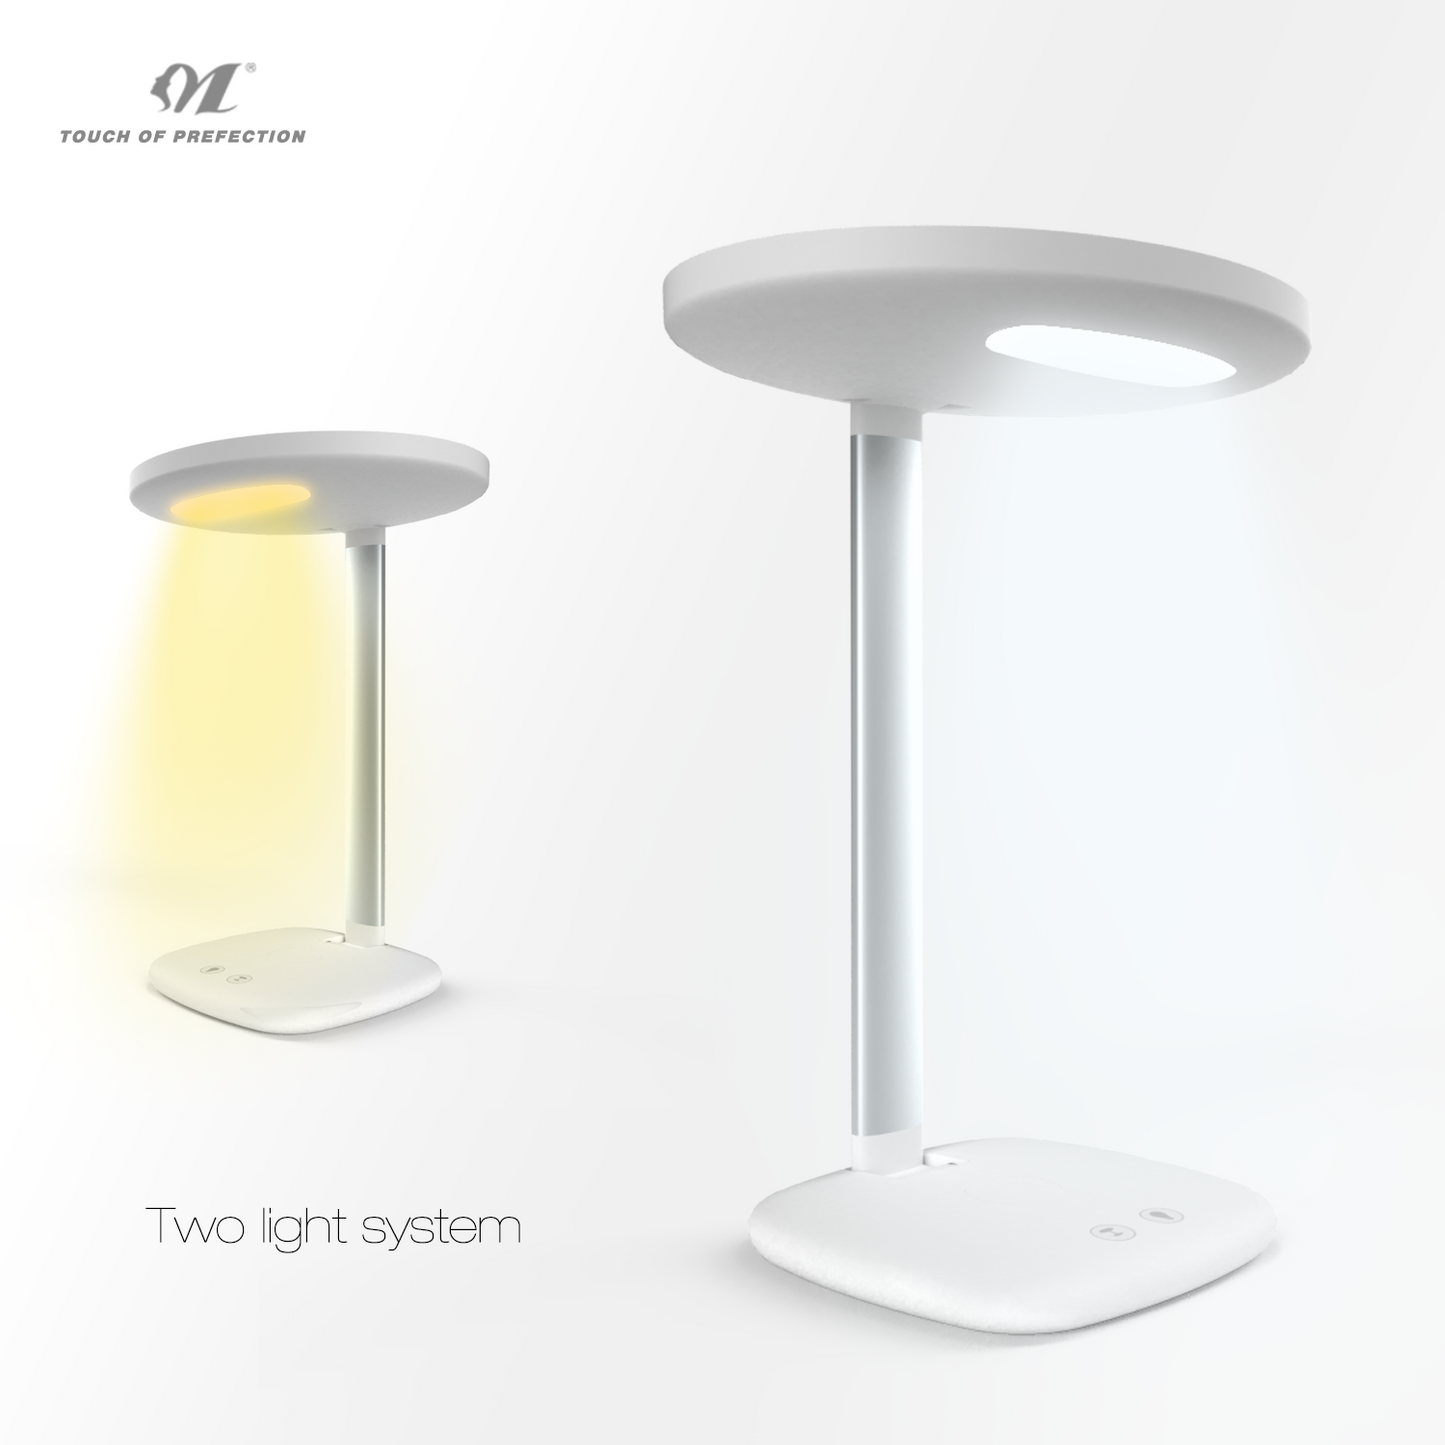 Desk mirror with lights lamps and wireless charger for phone charging